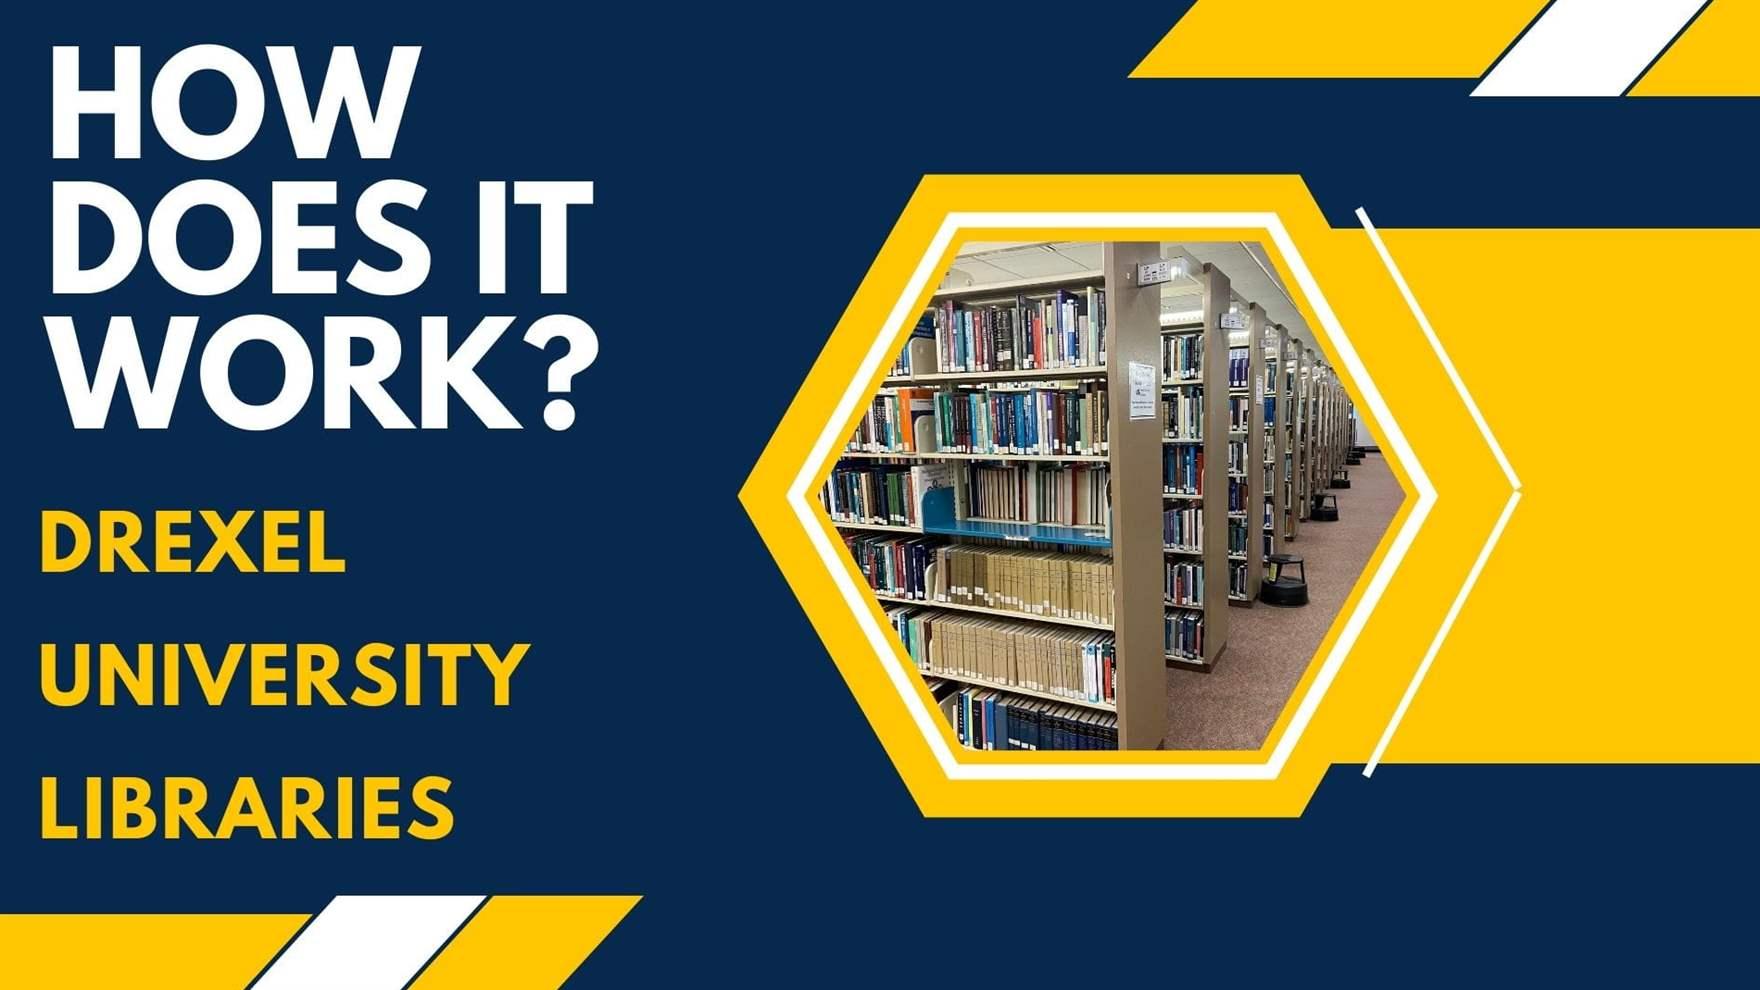 &quot;How Does it Work? Drexel University Libraries&quot; and a picture in a hexagon of a stack of bookcases.